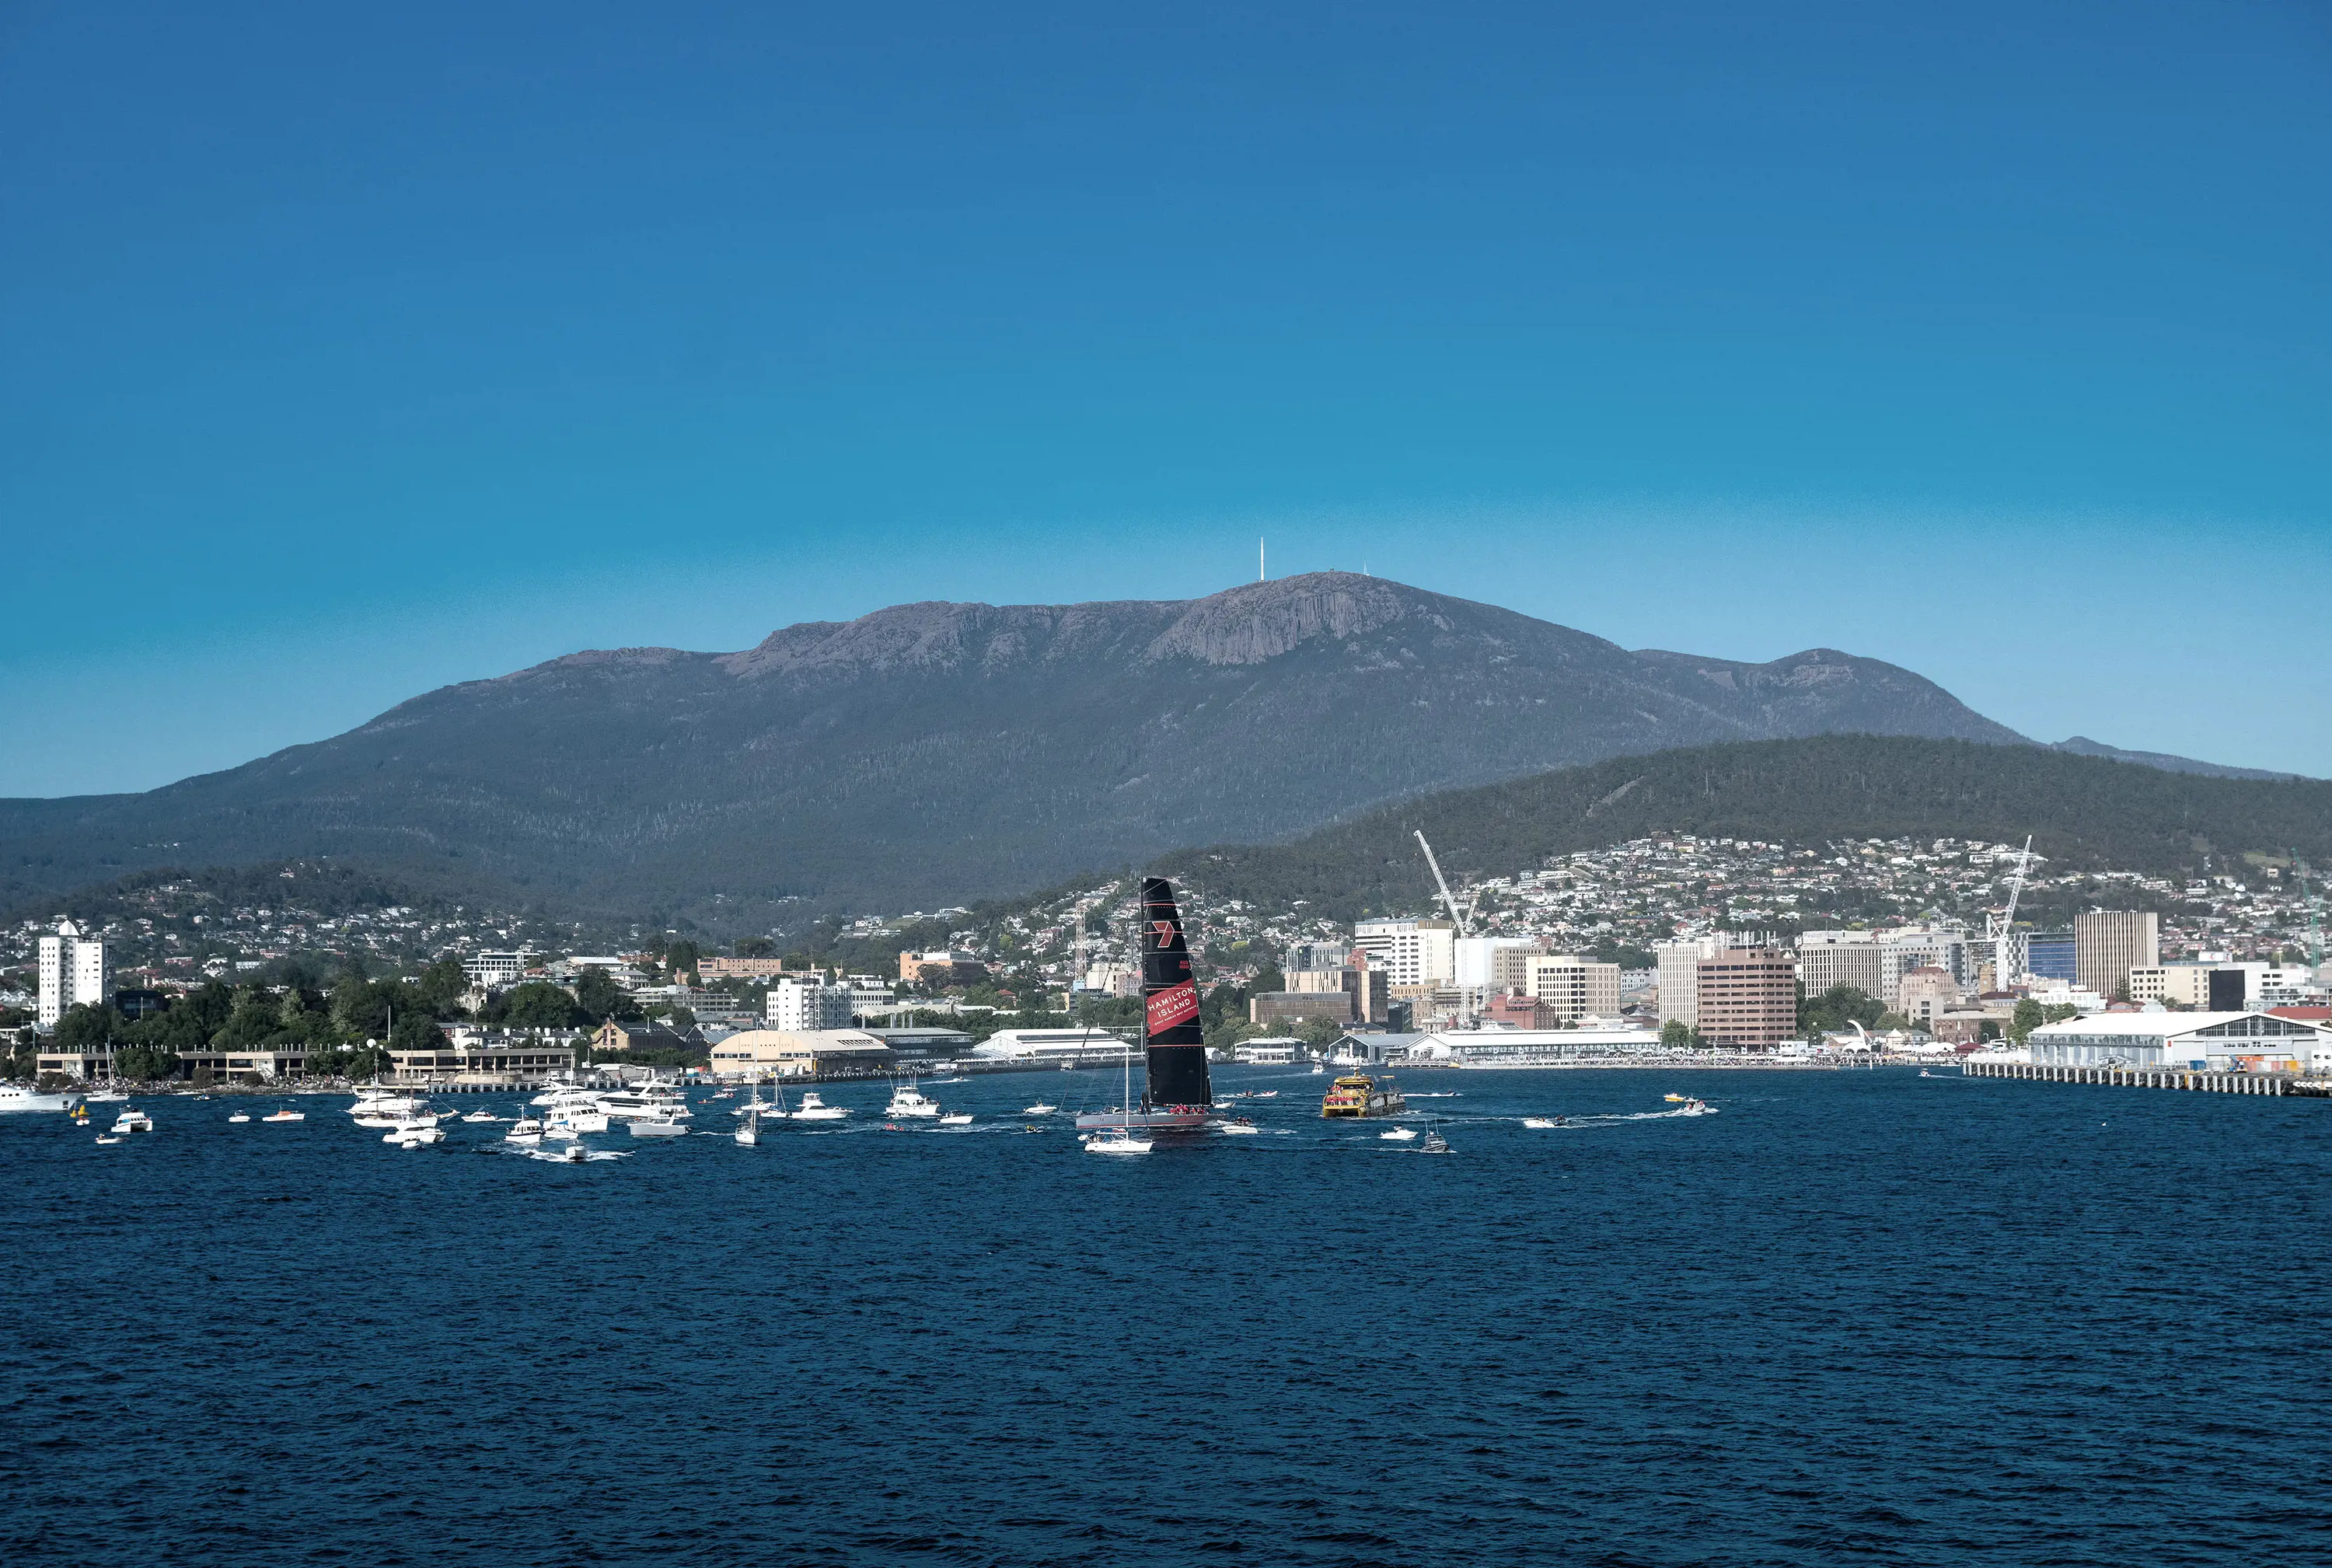 A large racing yacht and many small cruising yachts circle around in the waters around the Hobart docks.